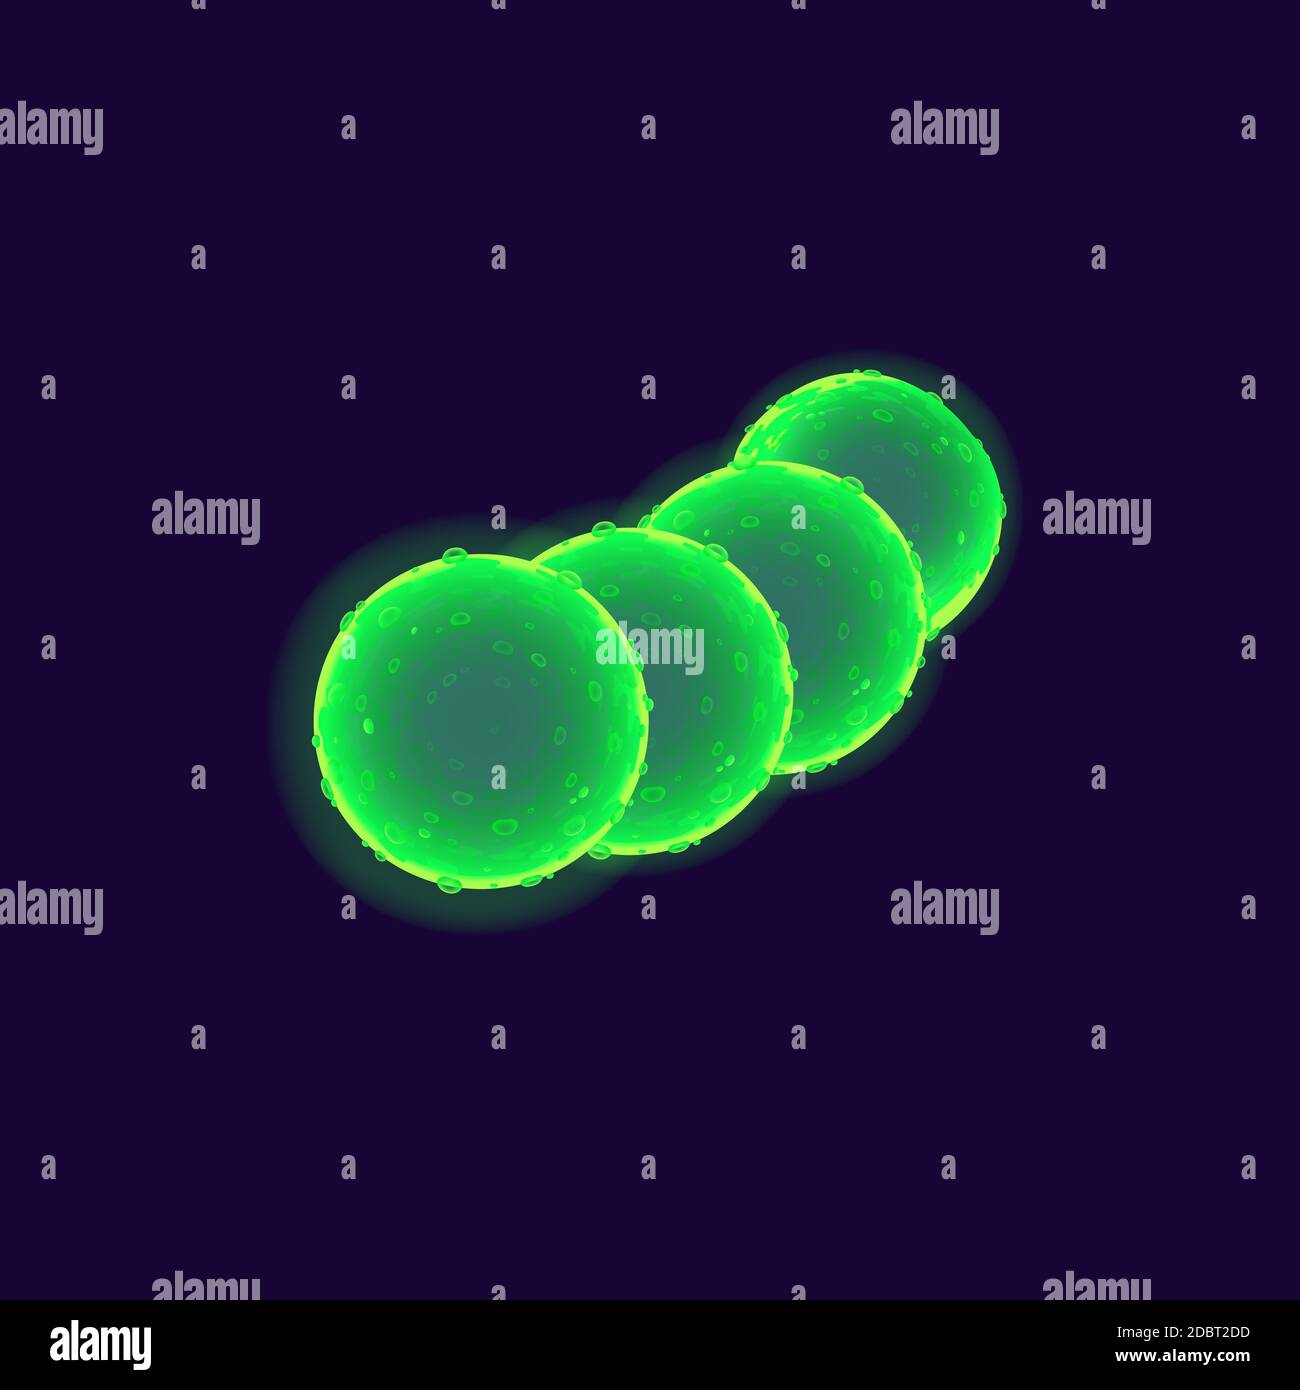 Bacteria cell realistic vector illustration. Pathogenic organism. Streptococcus chain. 3d isolated green color round shape microorganism under microsc Stock Photo